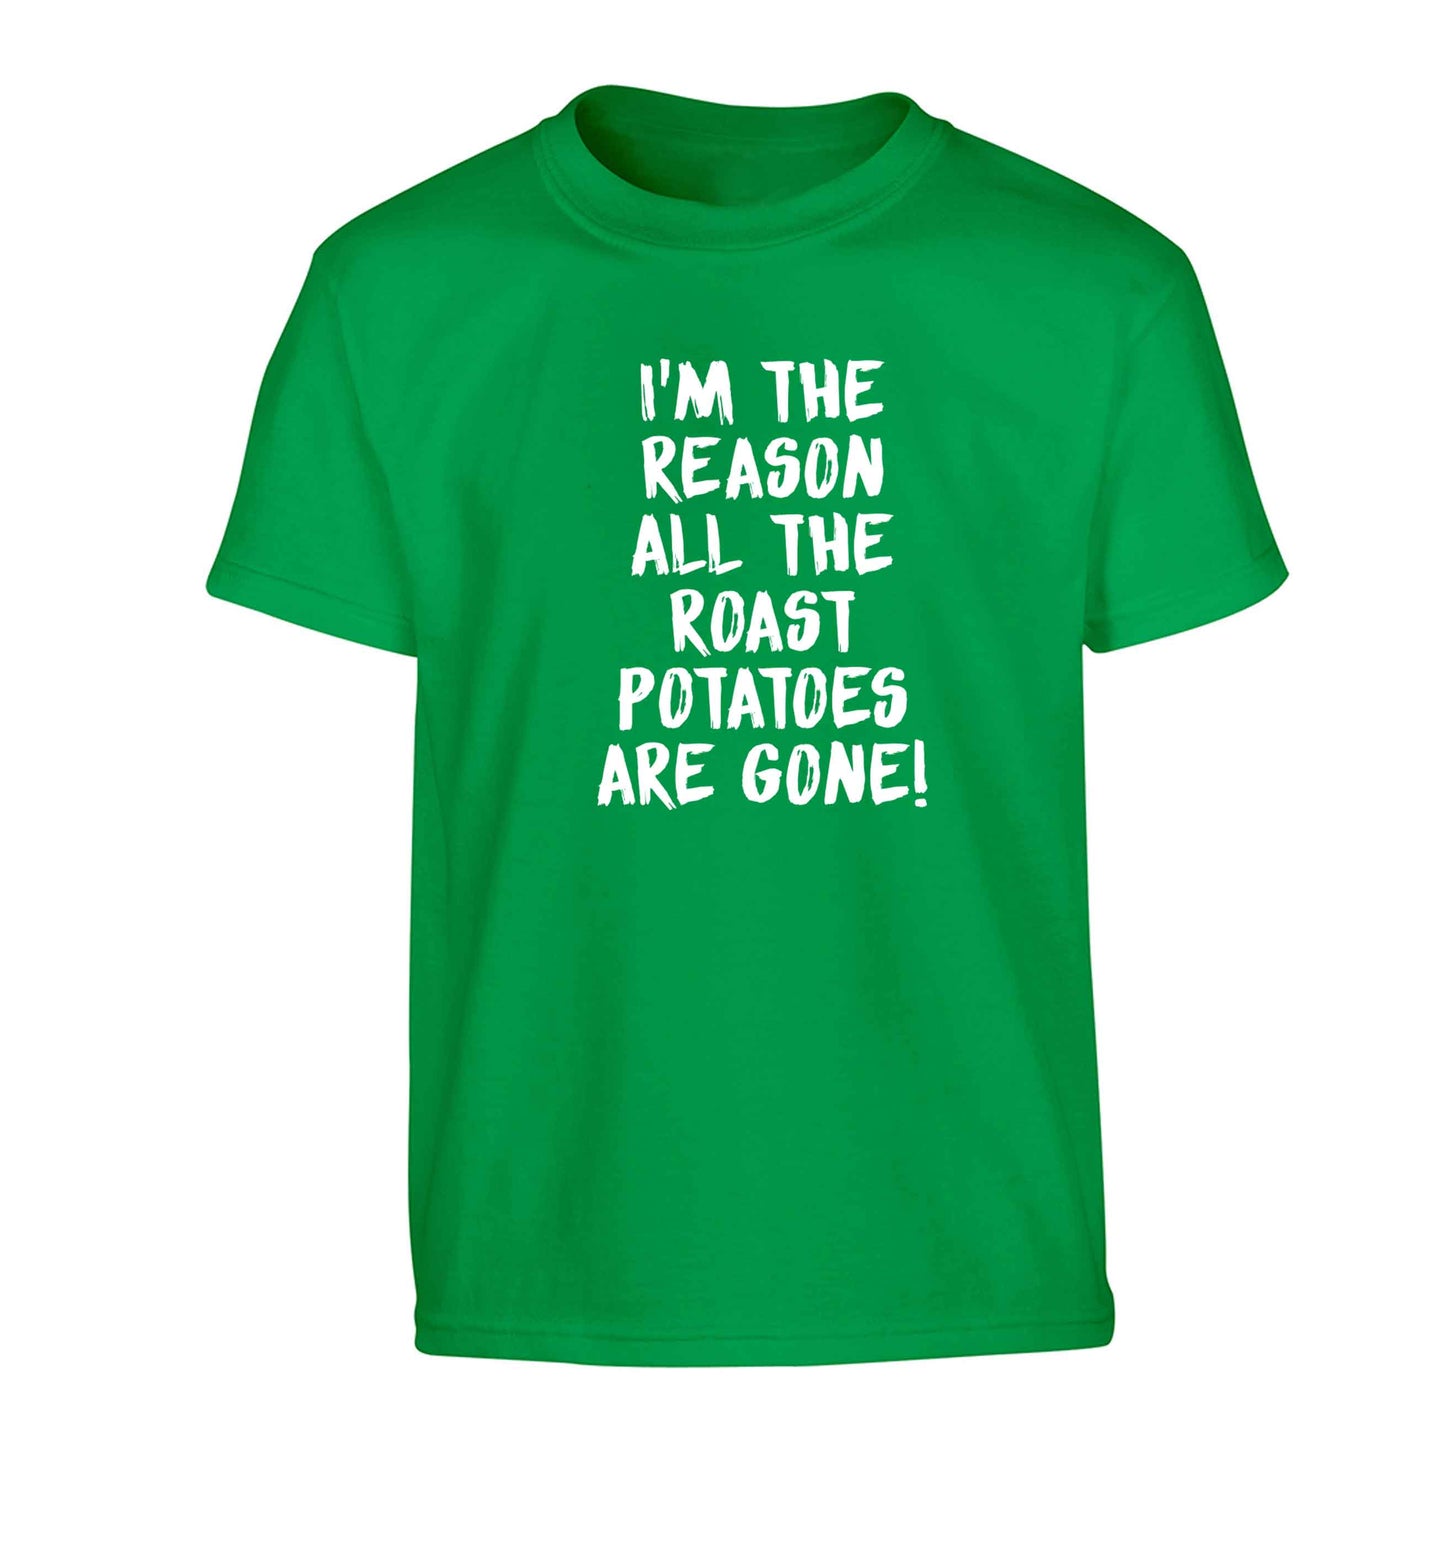 I'm the reason all the roast potatoes are gone Children's green Tshirt 12-13 Years